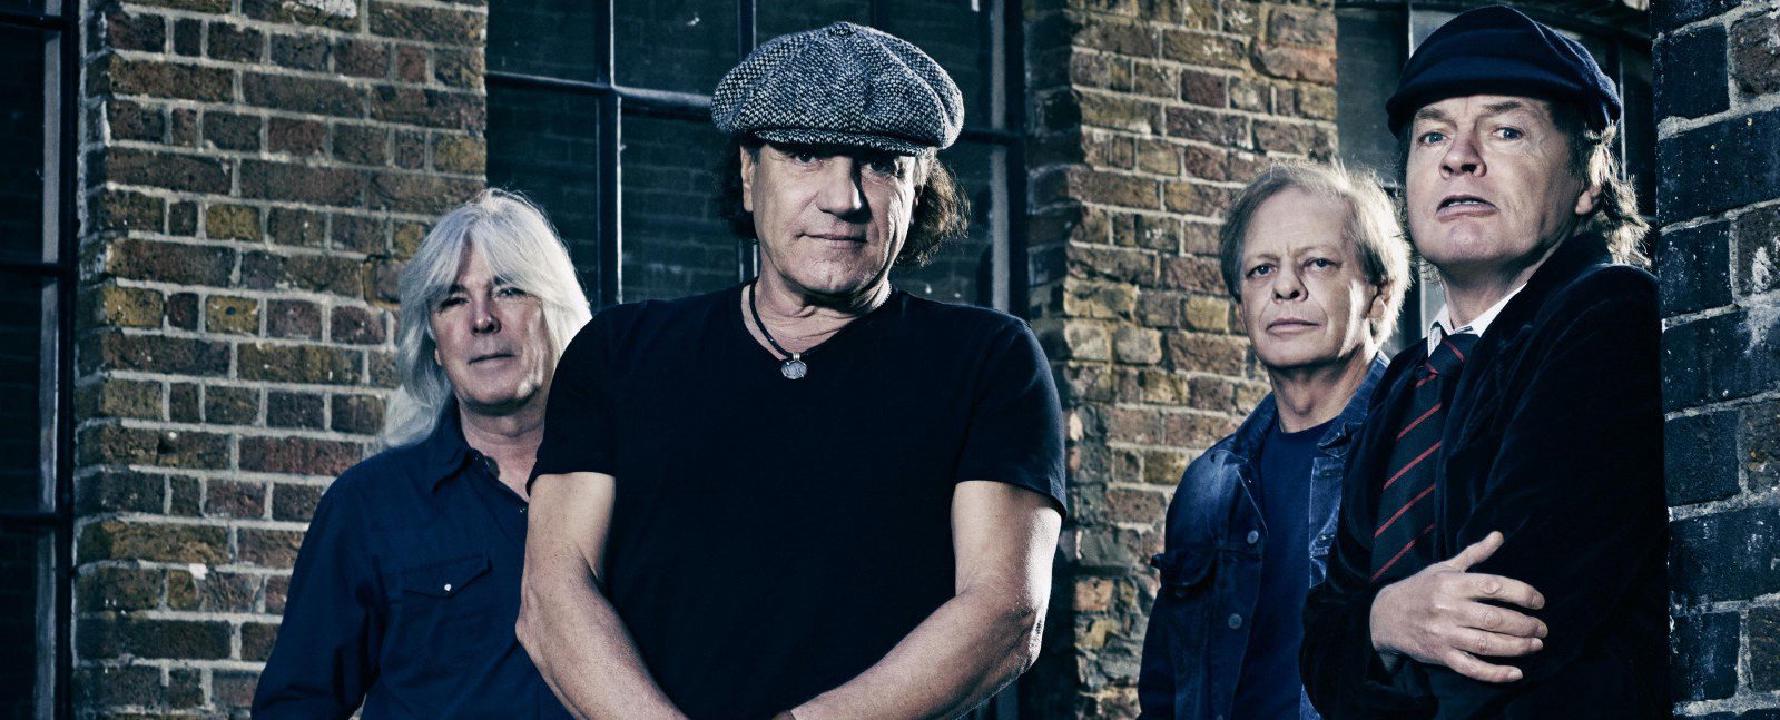 Promotional photograph of AC/DC.